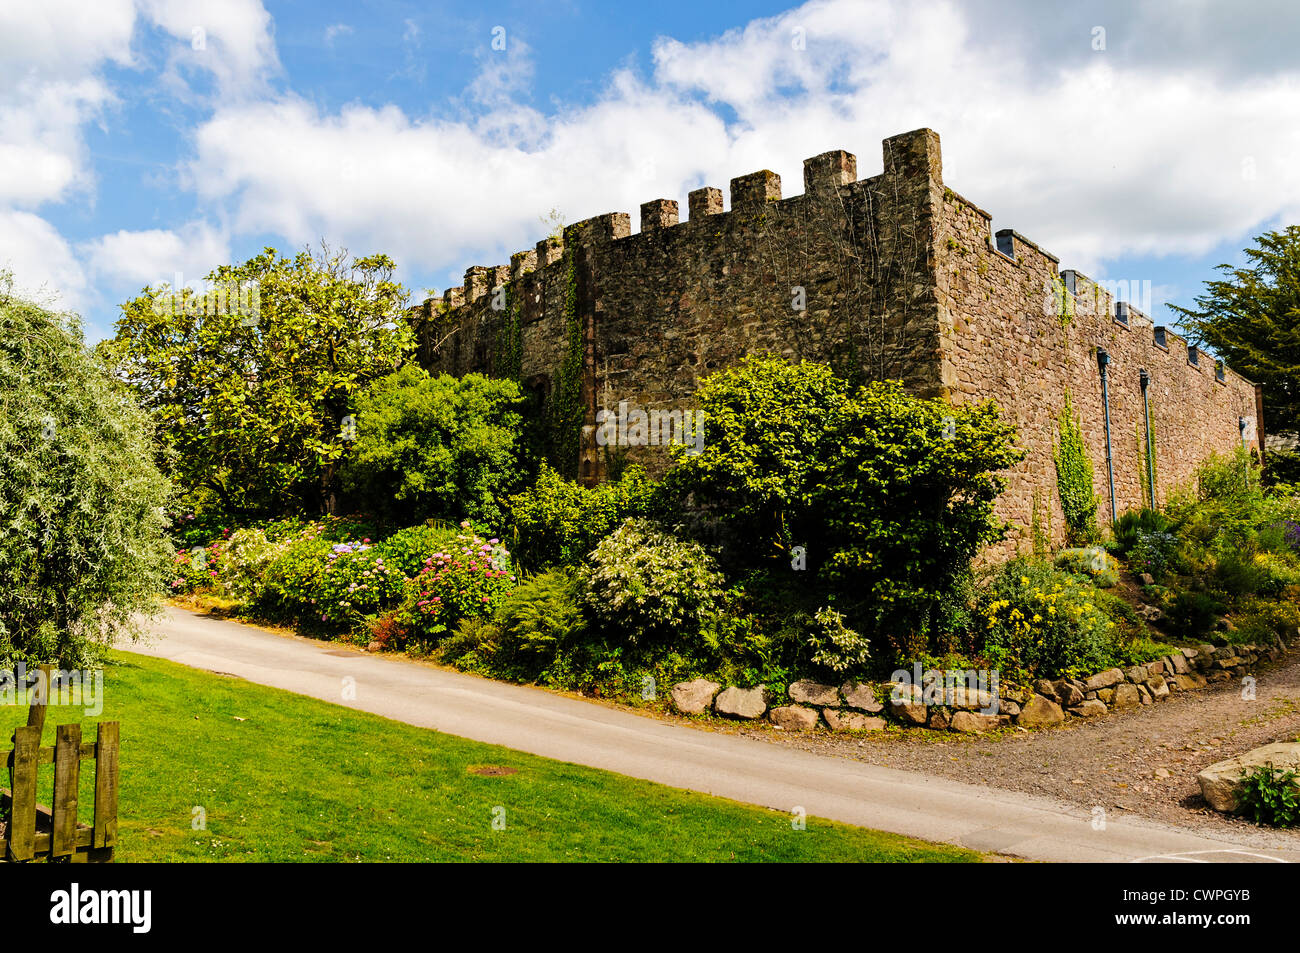 Trees and shrubs form an attractive border around tall crenelated stone walls enclosing the restaurant at Muncaster Castle Stock Photo